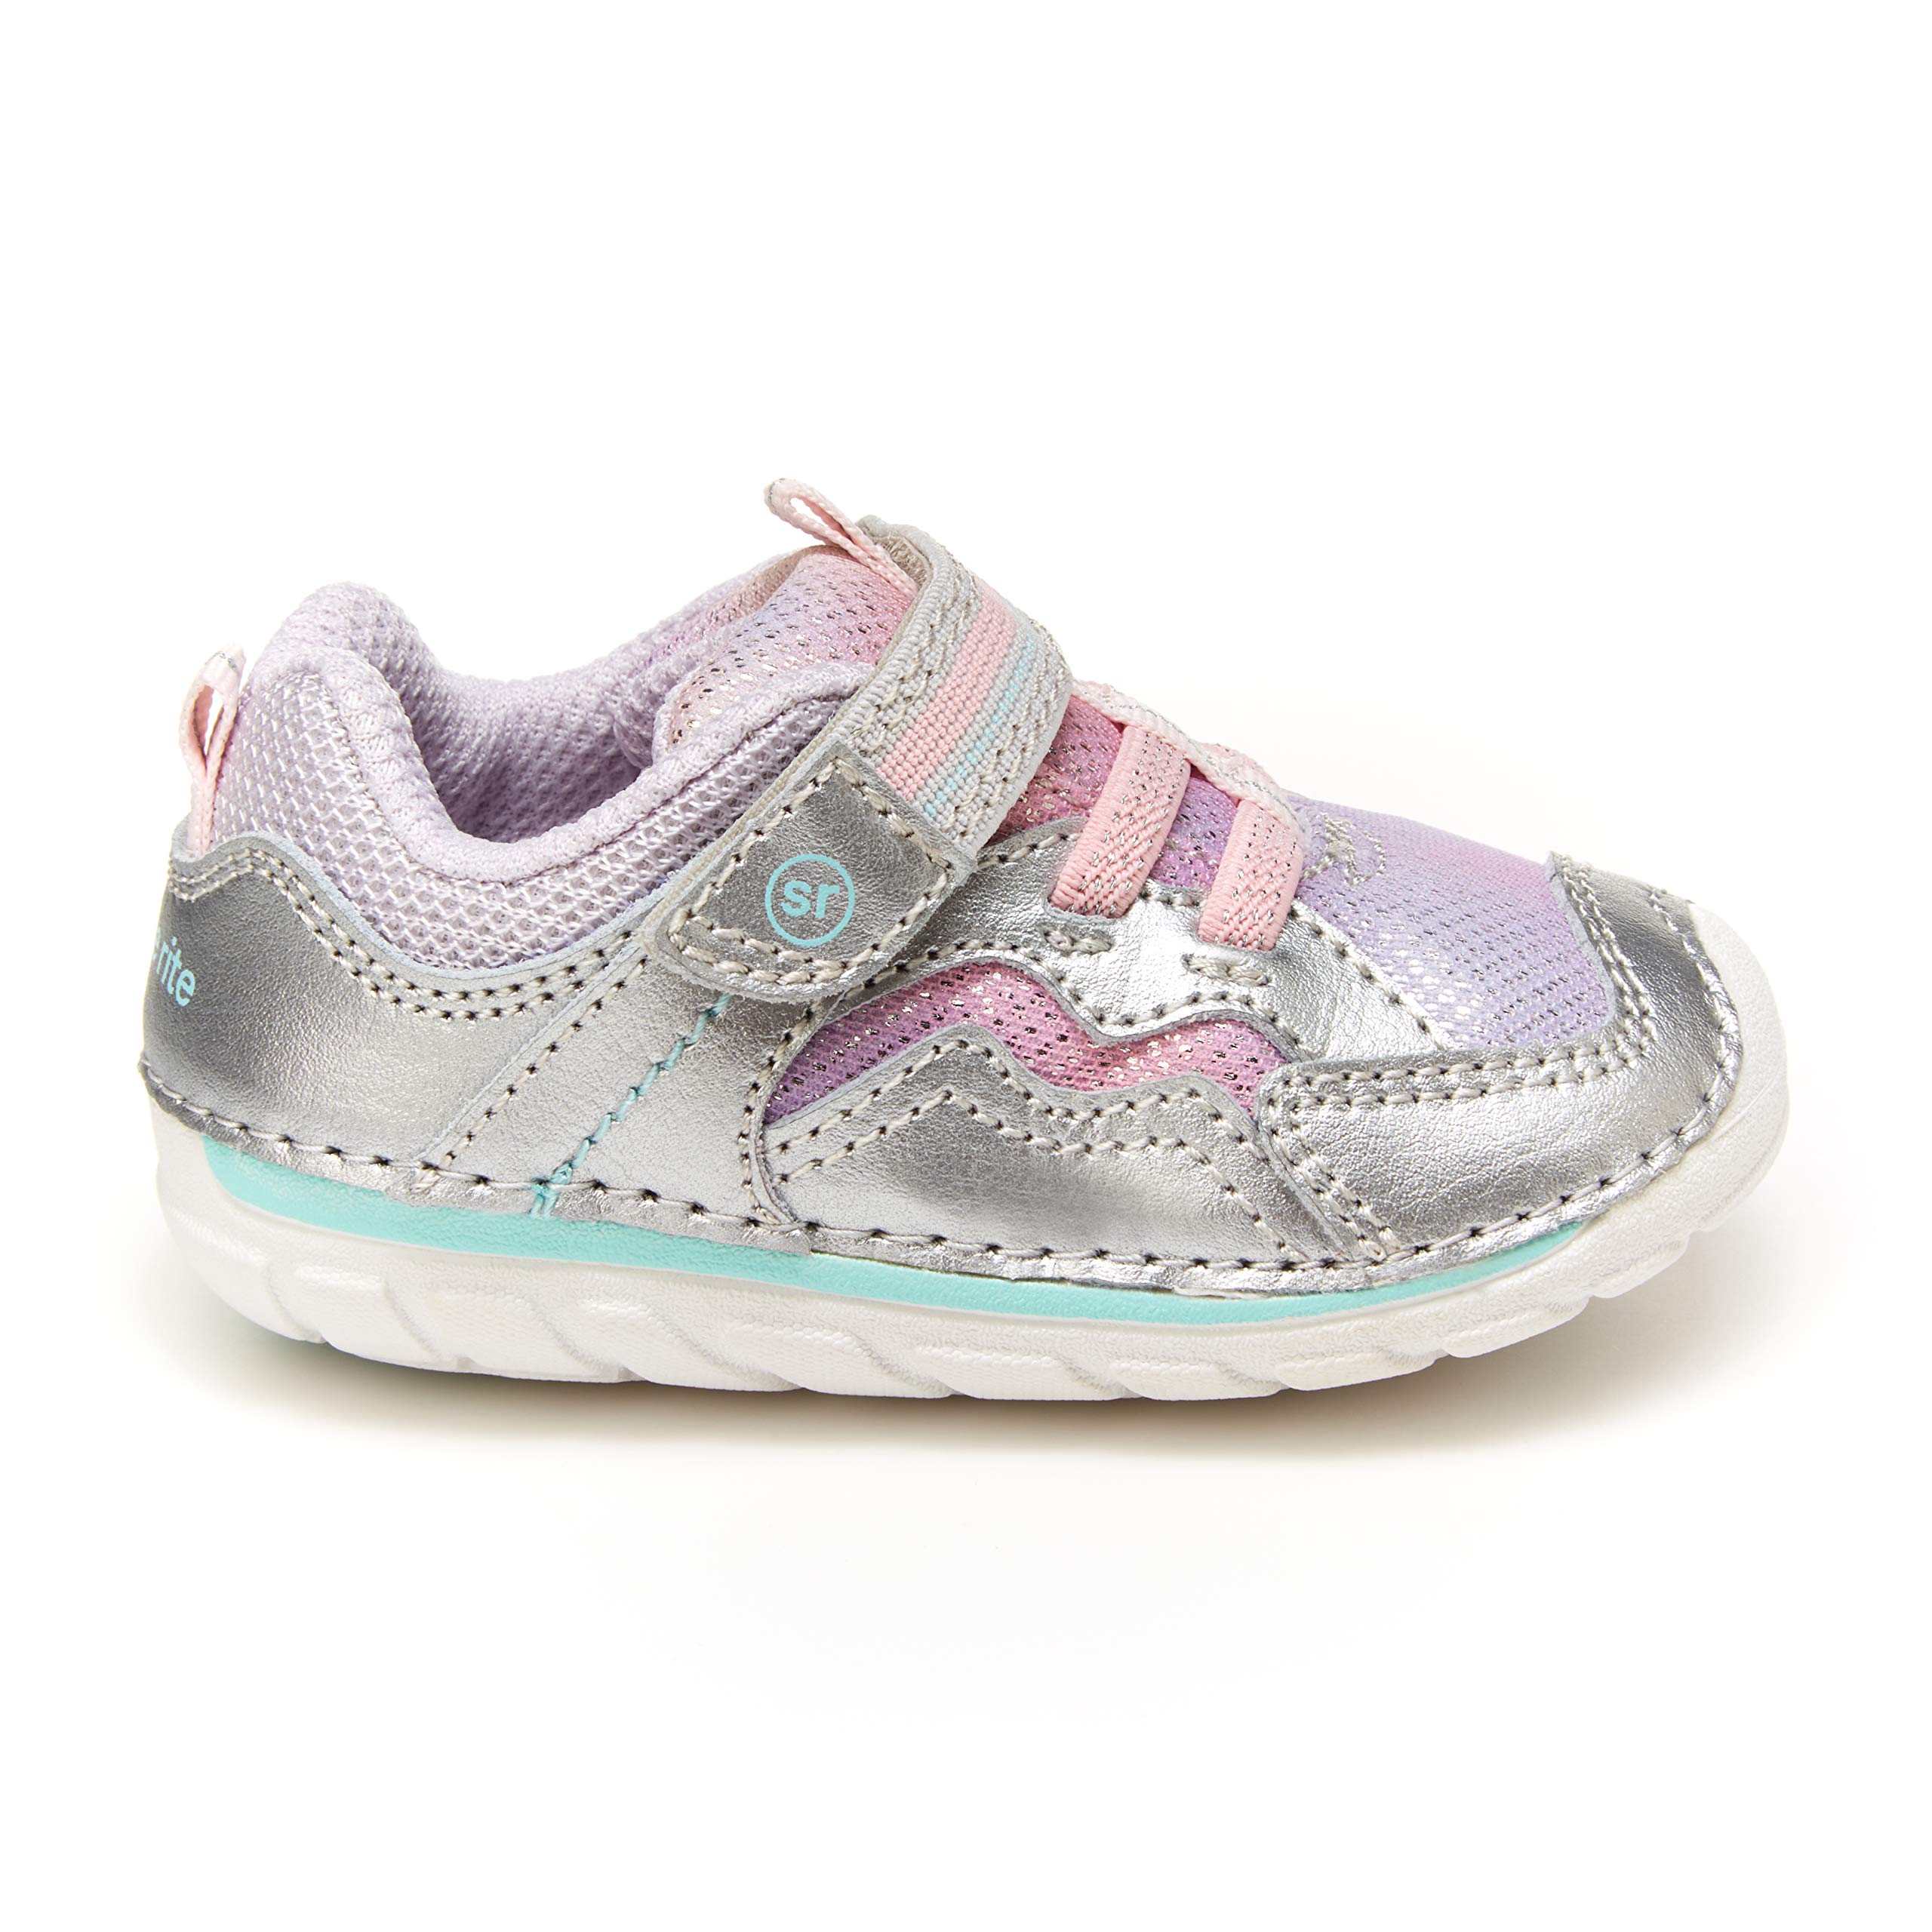 Stride Rite baby girls Soft Motion Kylo Sneaker, Silver/Multi, 4.5 Wide Toddler US